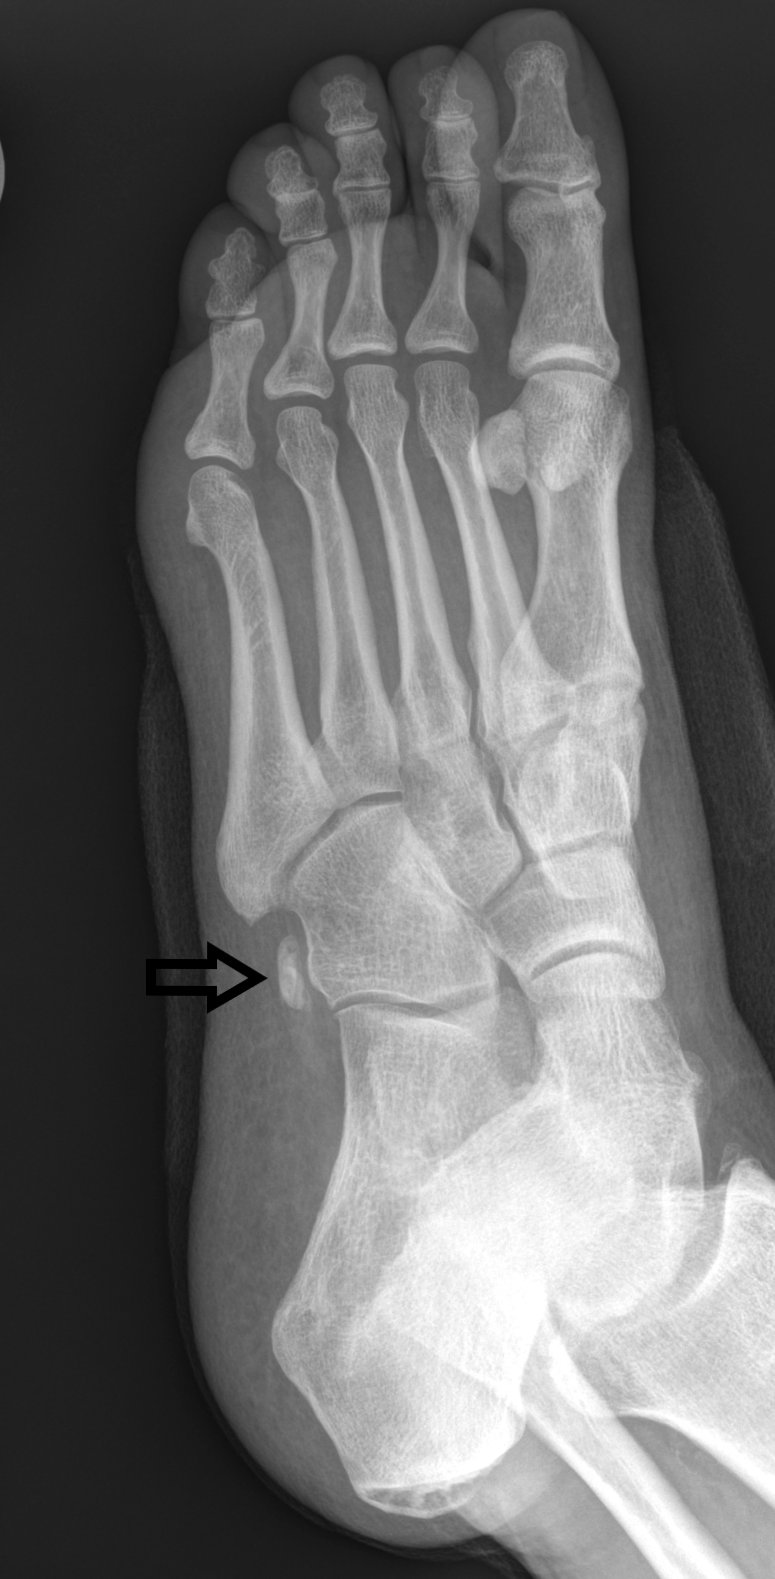 Prominent os peroneus on an oblique radiograph of the left foot. This finding may correlate to osseous enlargement as a chronic stress-related change versus a congenital prominent appearance.